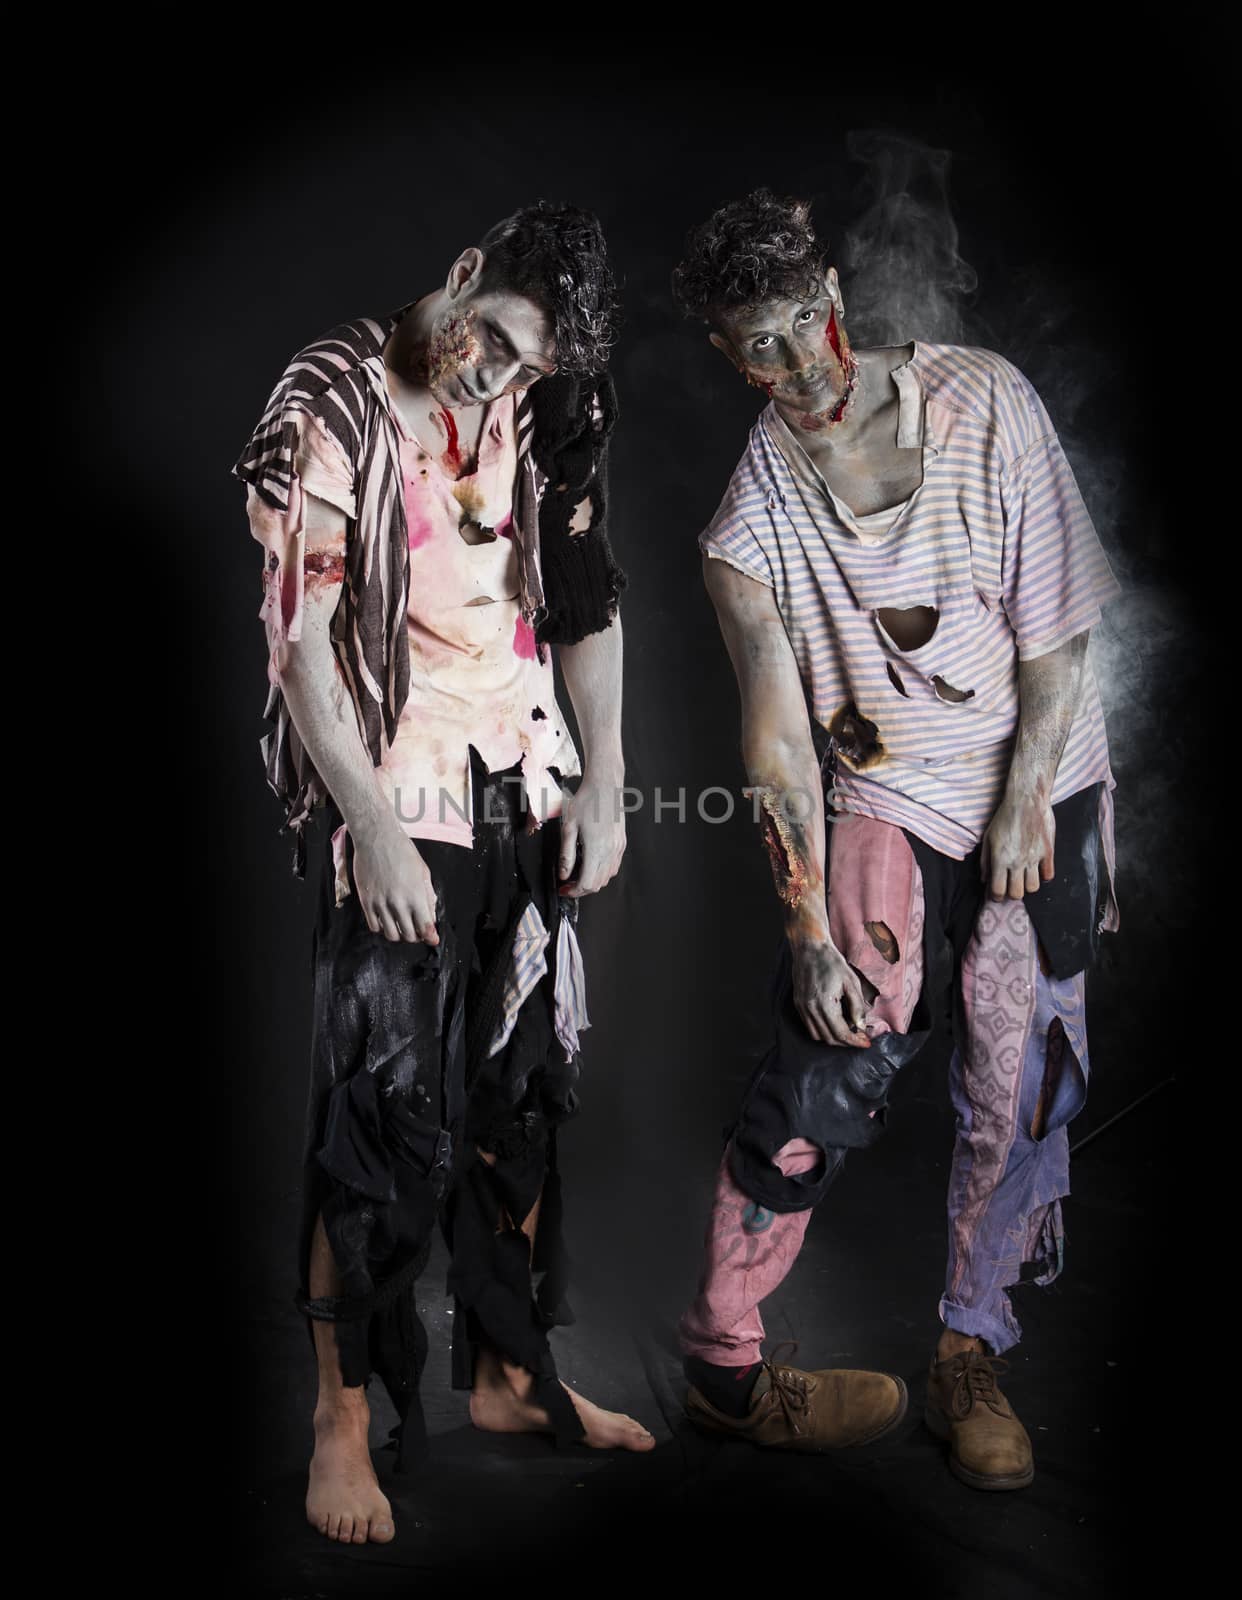 Two male zombies standing on black background, full body shot, looking at camera. Halloween theme